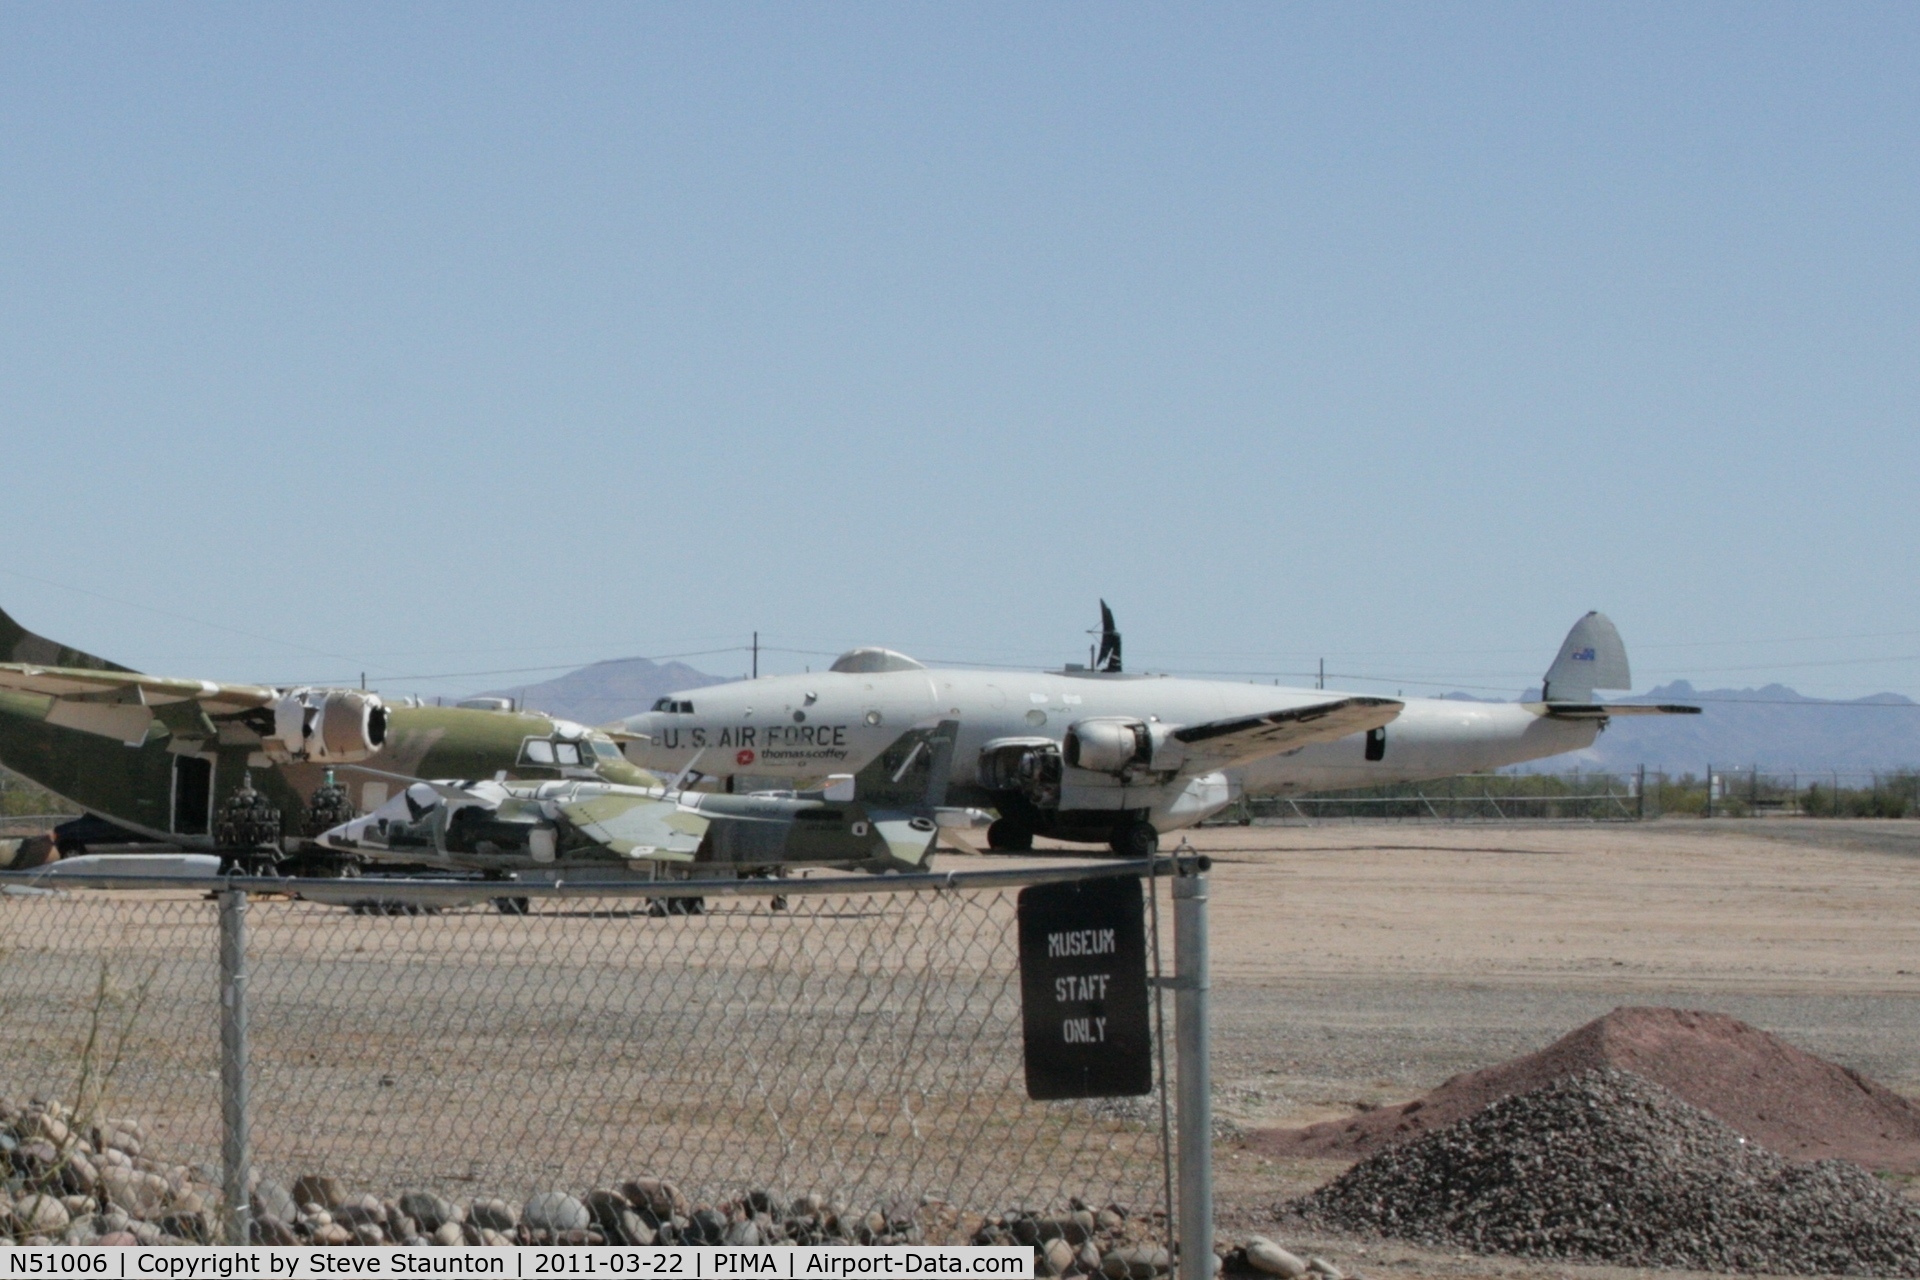 N51006, 1955 Lockheed EC-121 C/N 4350, Taken at Pima Air and Space Museum, in March 2011 whilst on an Aeroprint Aviation tour - located in the storage area